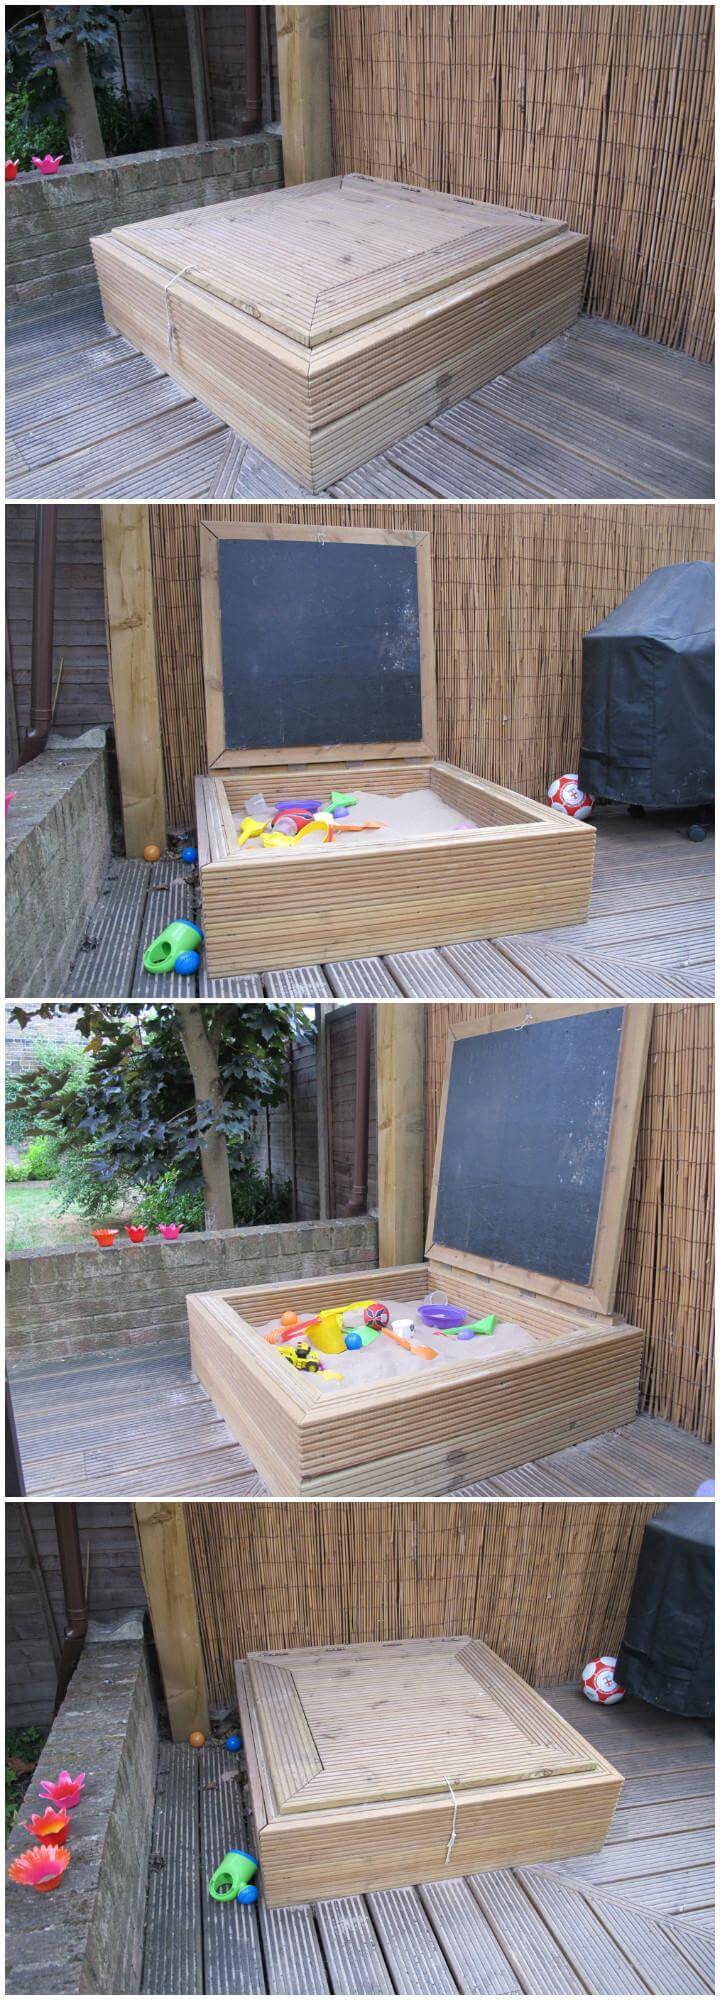 DIY Wooden Sandbox with Integrated Chalkboard in the Lid